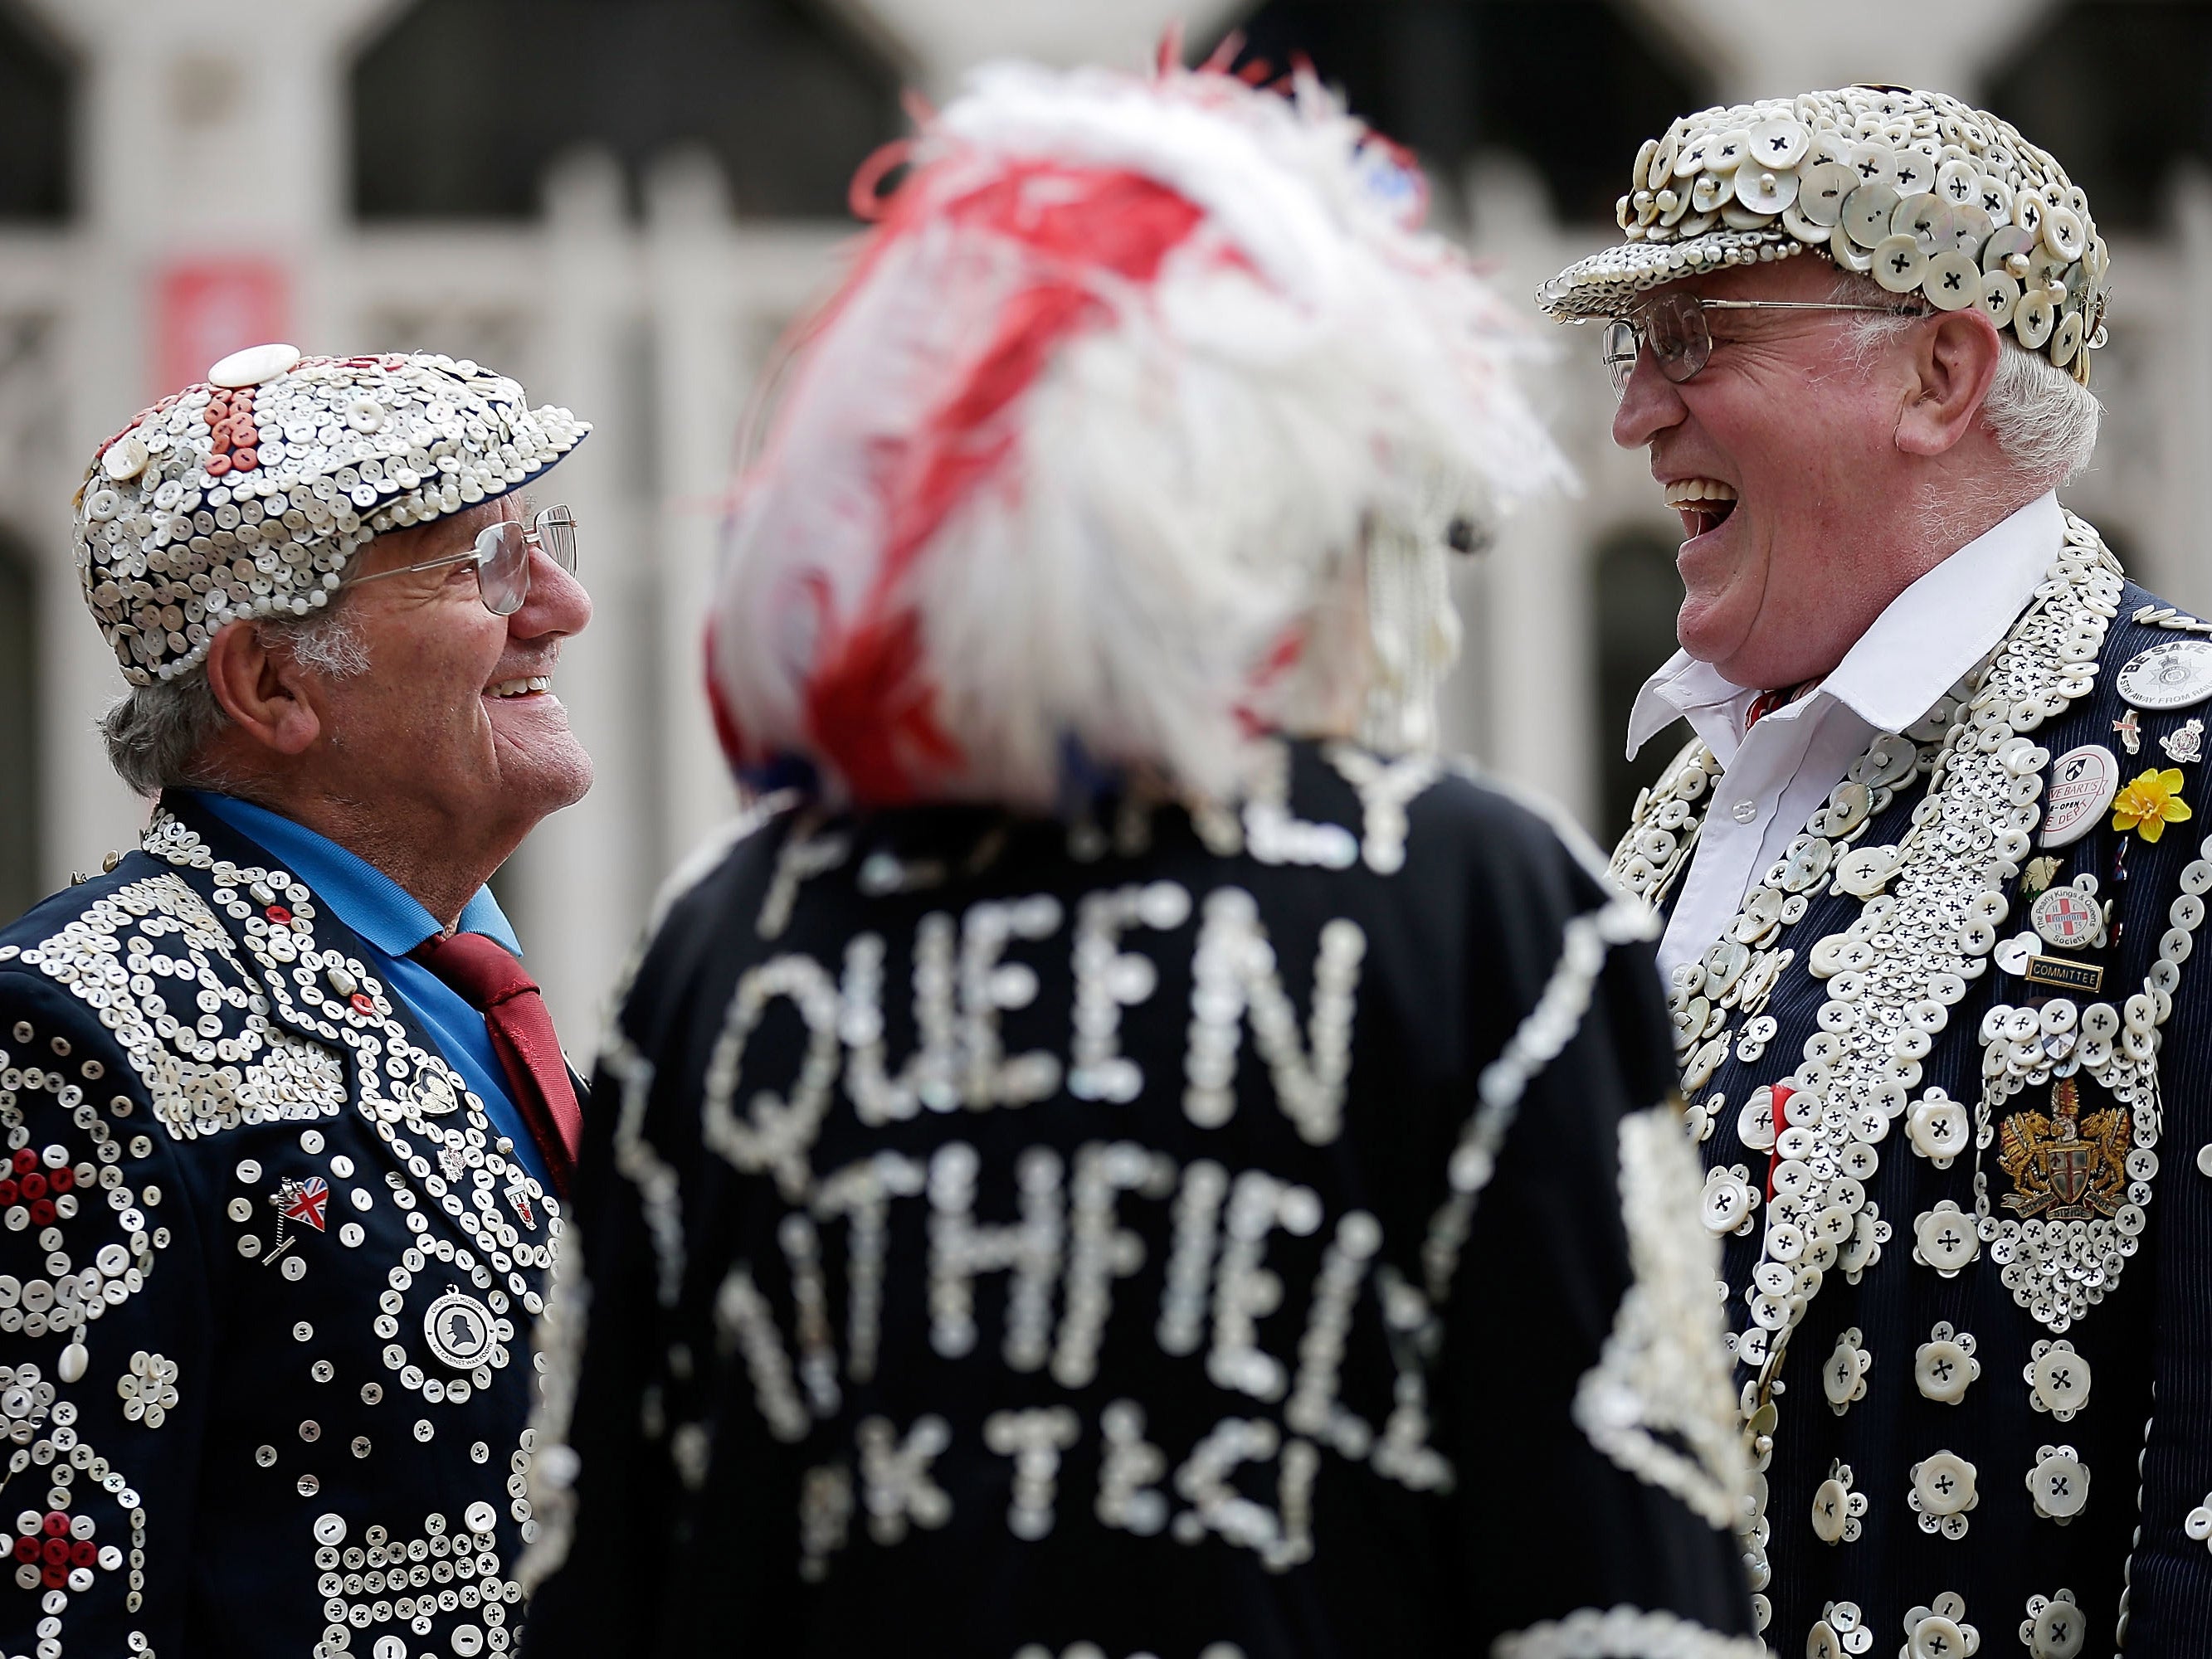 Pearly Kings and Queens gather in the Guildhall Yard in London